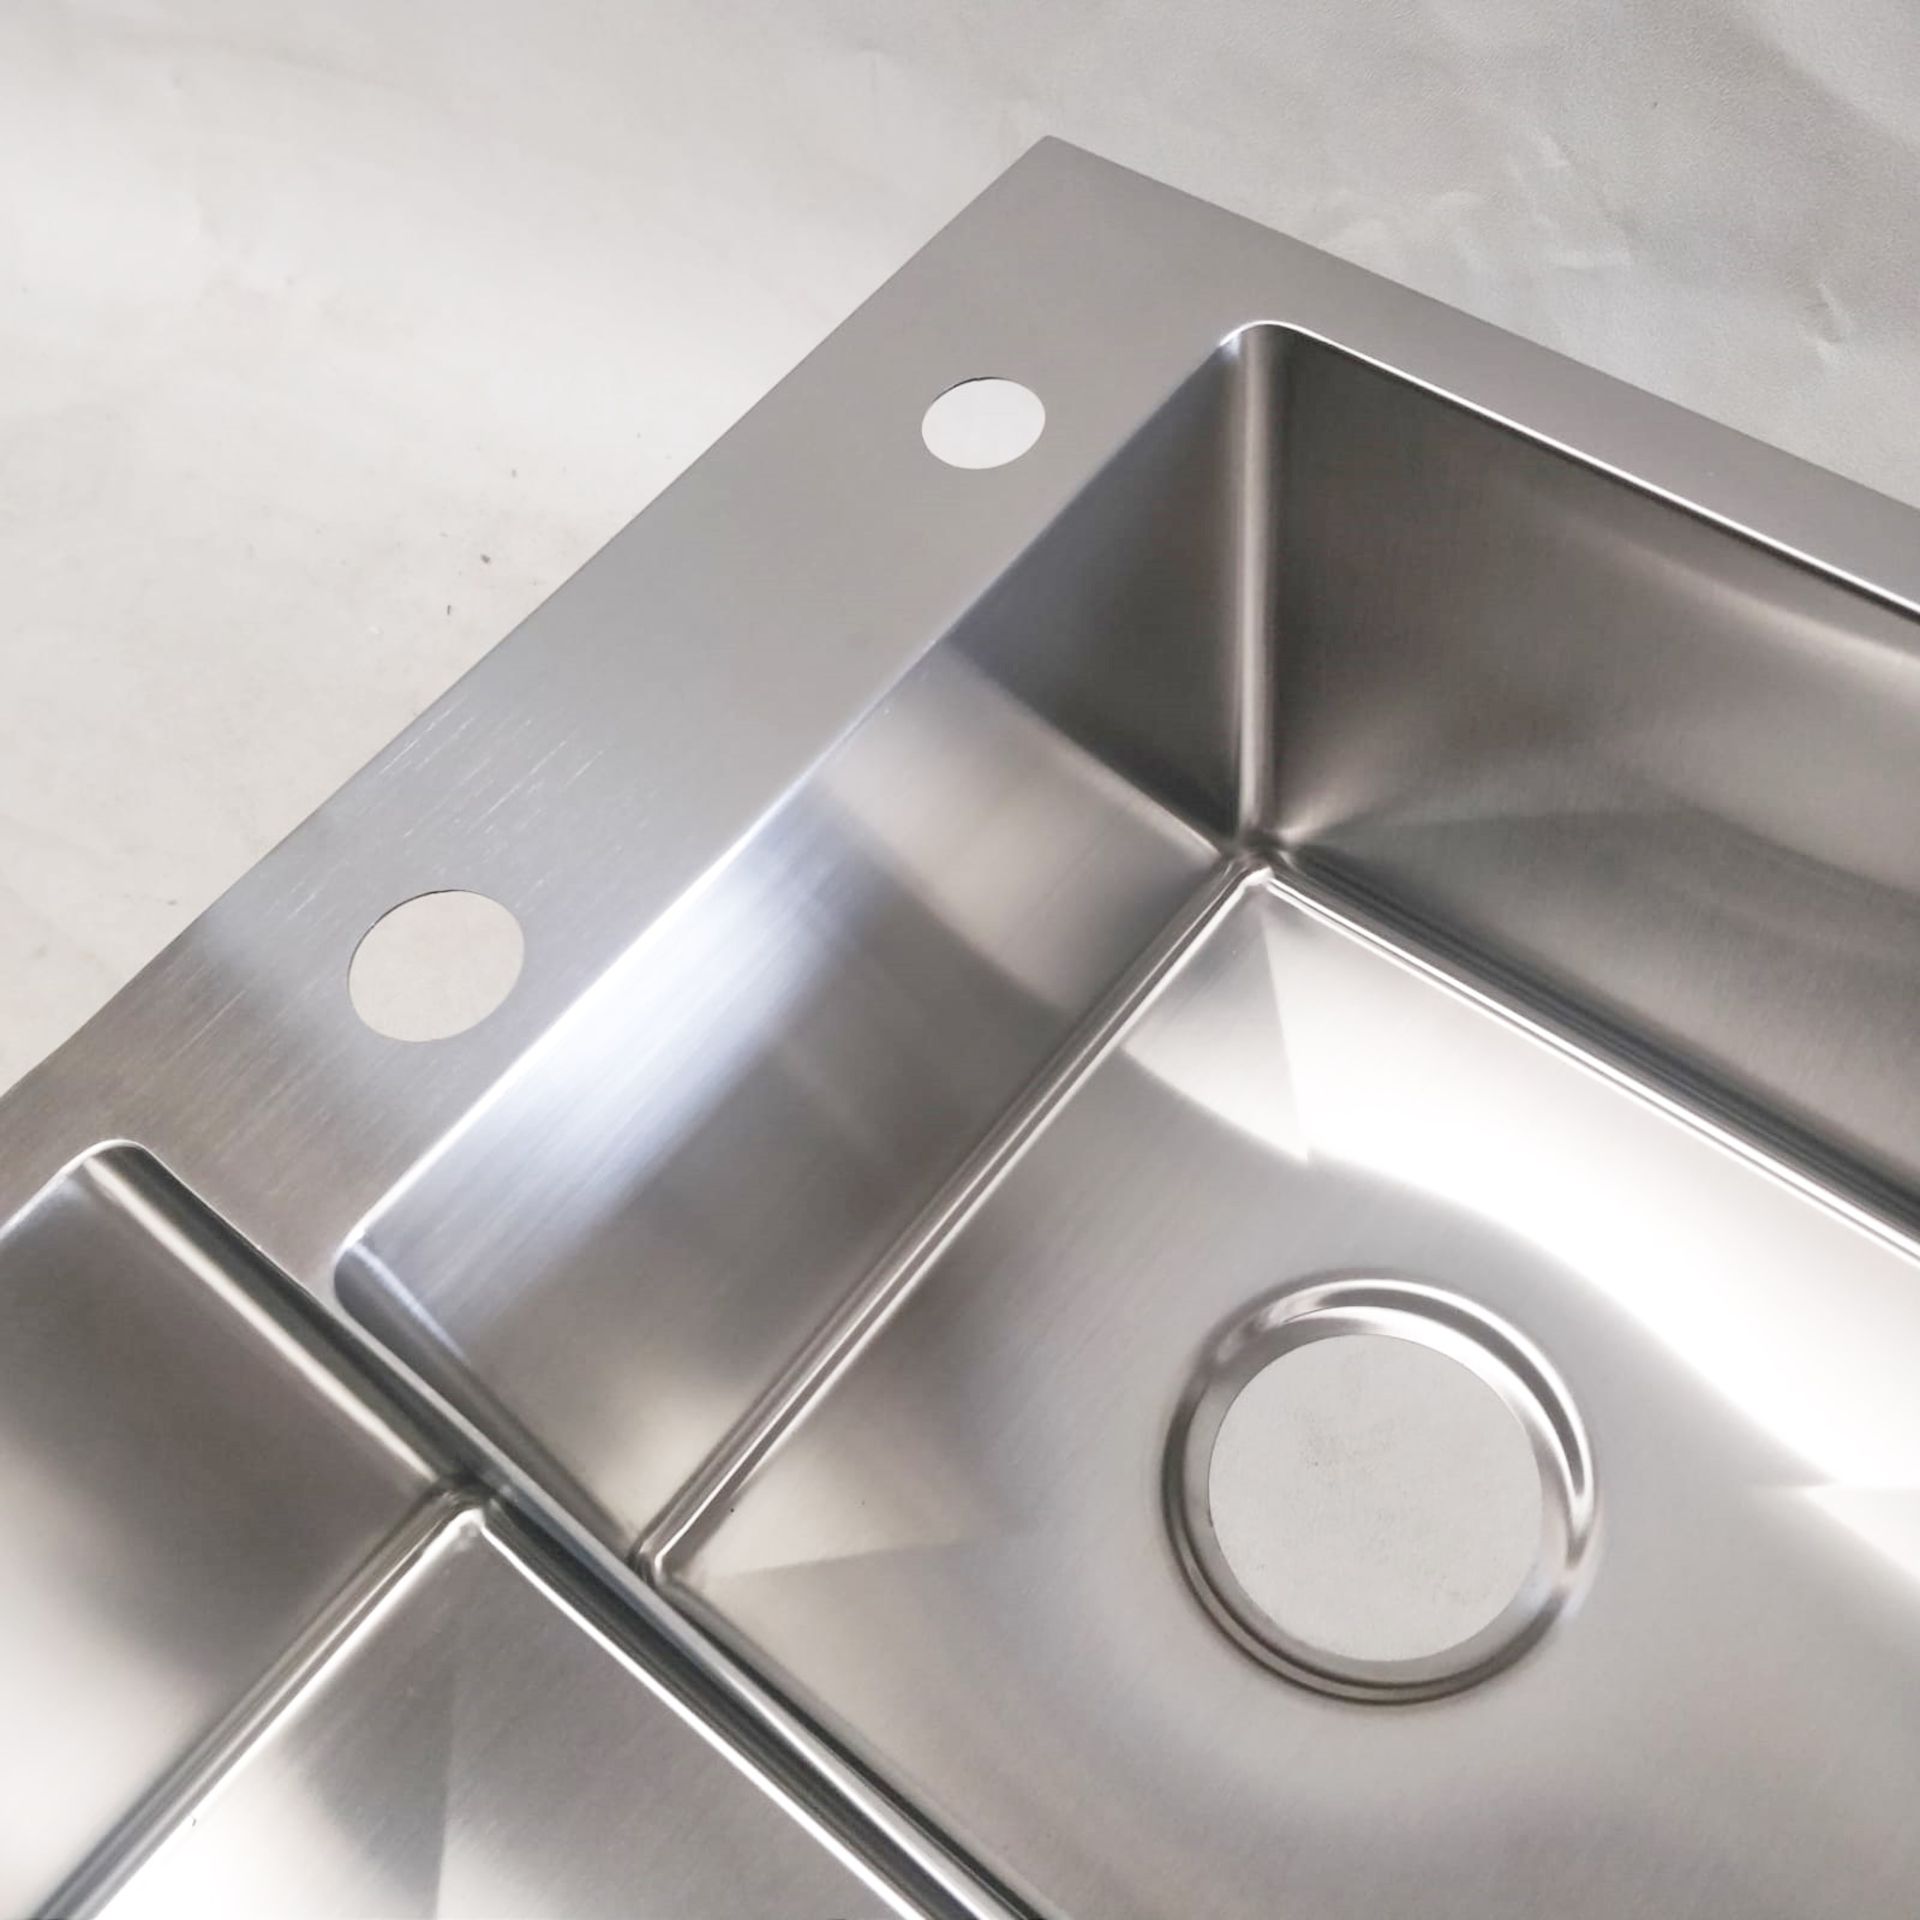 1 x Twin Bowl Contemporary Kitchen Sink Basin - Stainless Steel Finish - Model KS0059 - Includes - Image 14 of 16